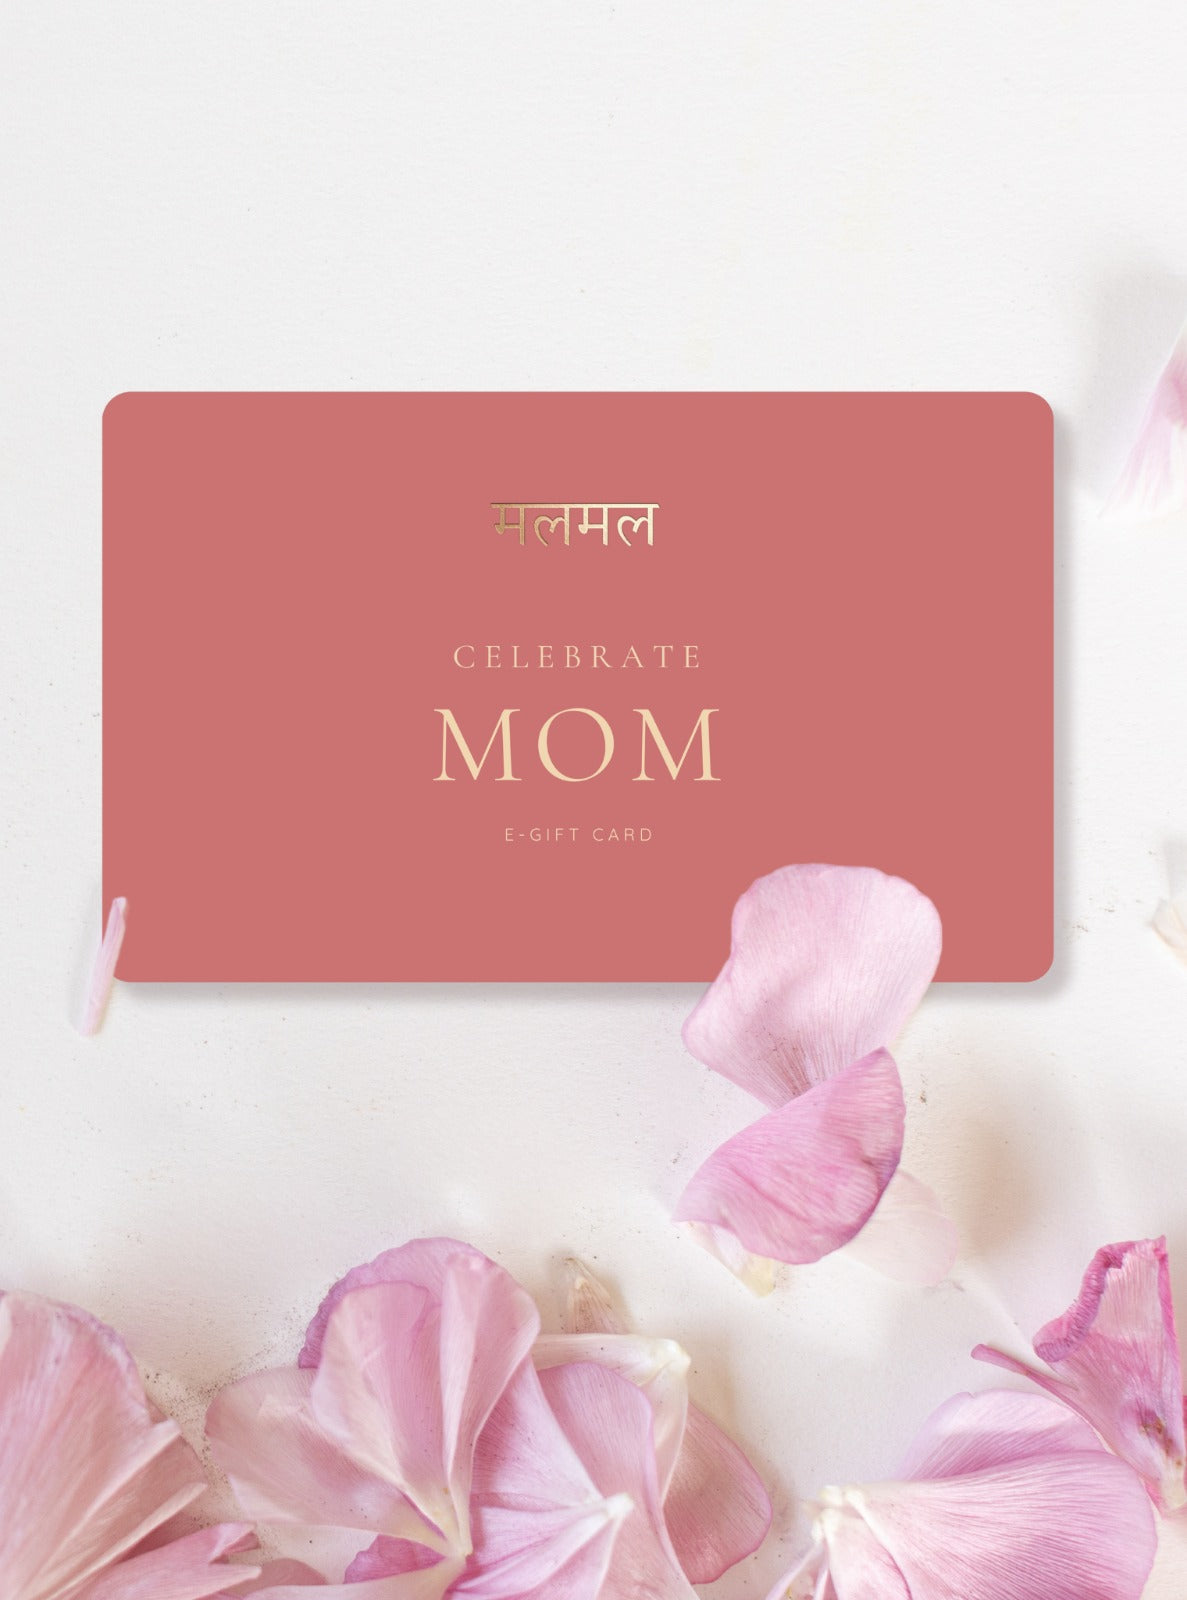 Mothers Day Gift Card